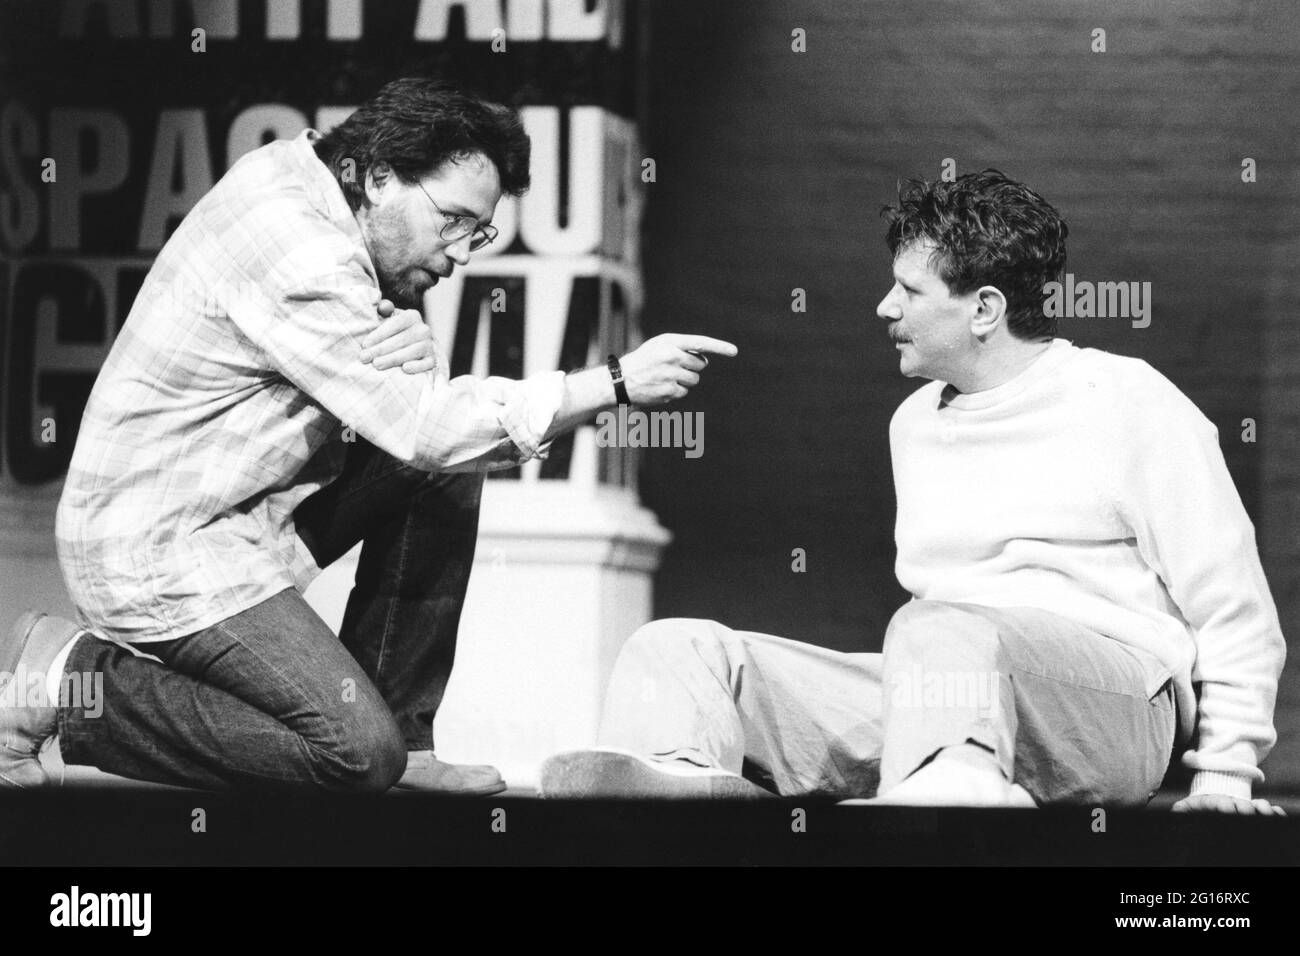 l-r: Tom Hulce (Ned Weeks), Paul Jesson (Felix Turner) in THE NORMAL HEART by Larry Kramer at the Albery Theatre, London WC2  20/05/1986  a Royal Court Theatre production  design: Geoff Rose  lighting: Gerry Jenkinson  director: David Hayman Stock Photo